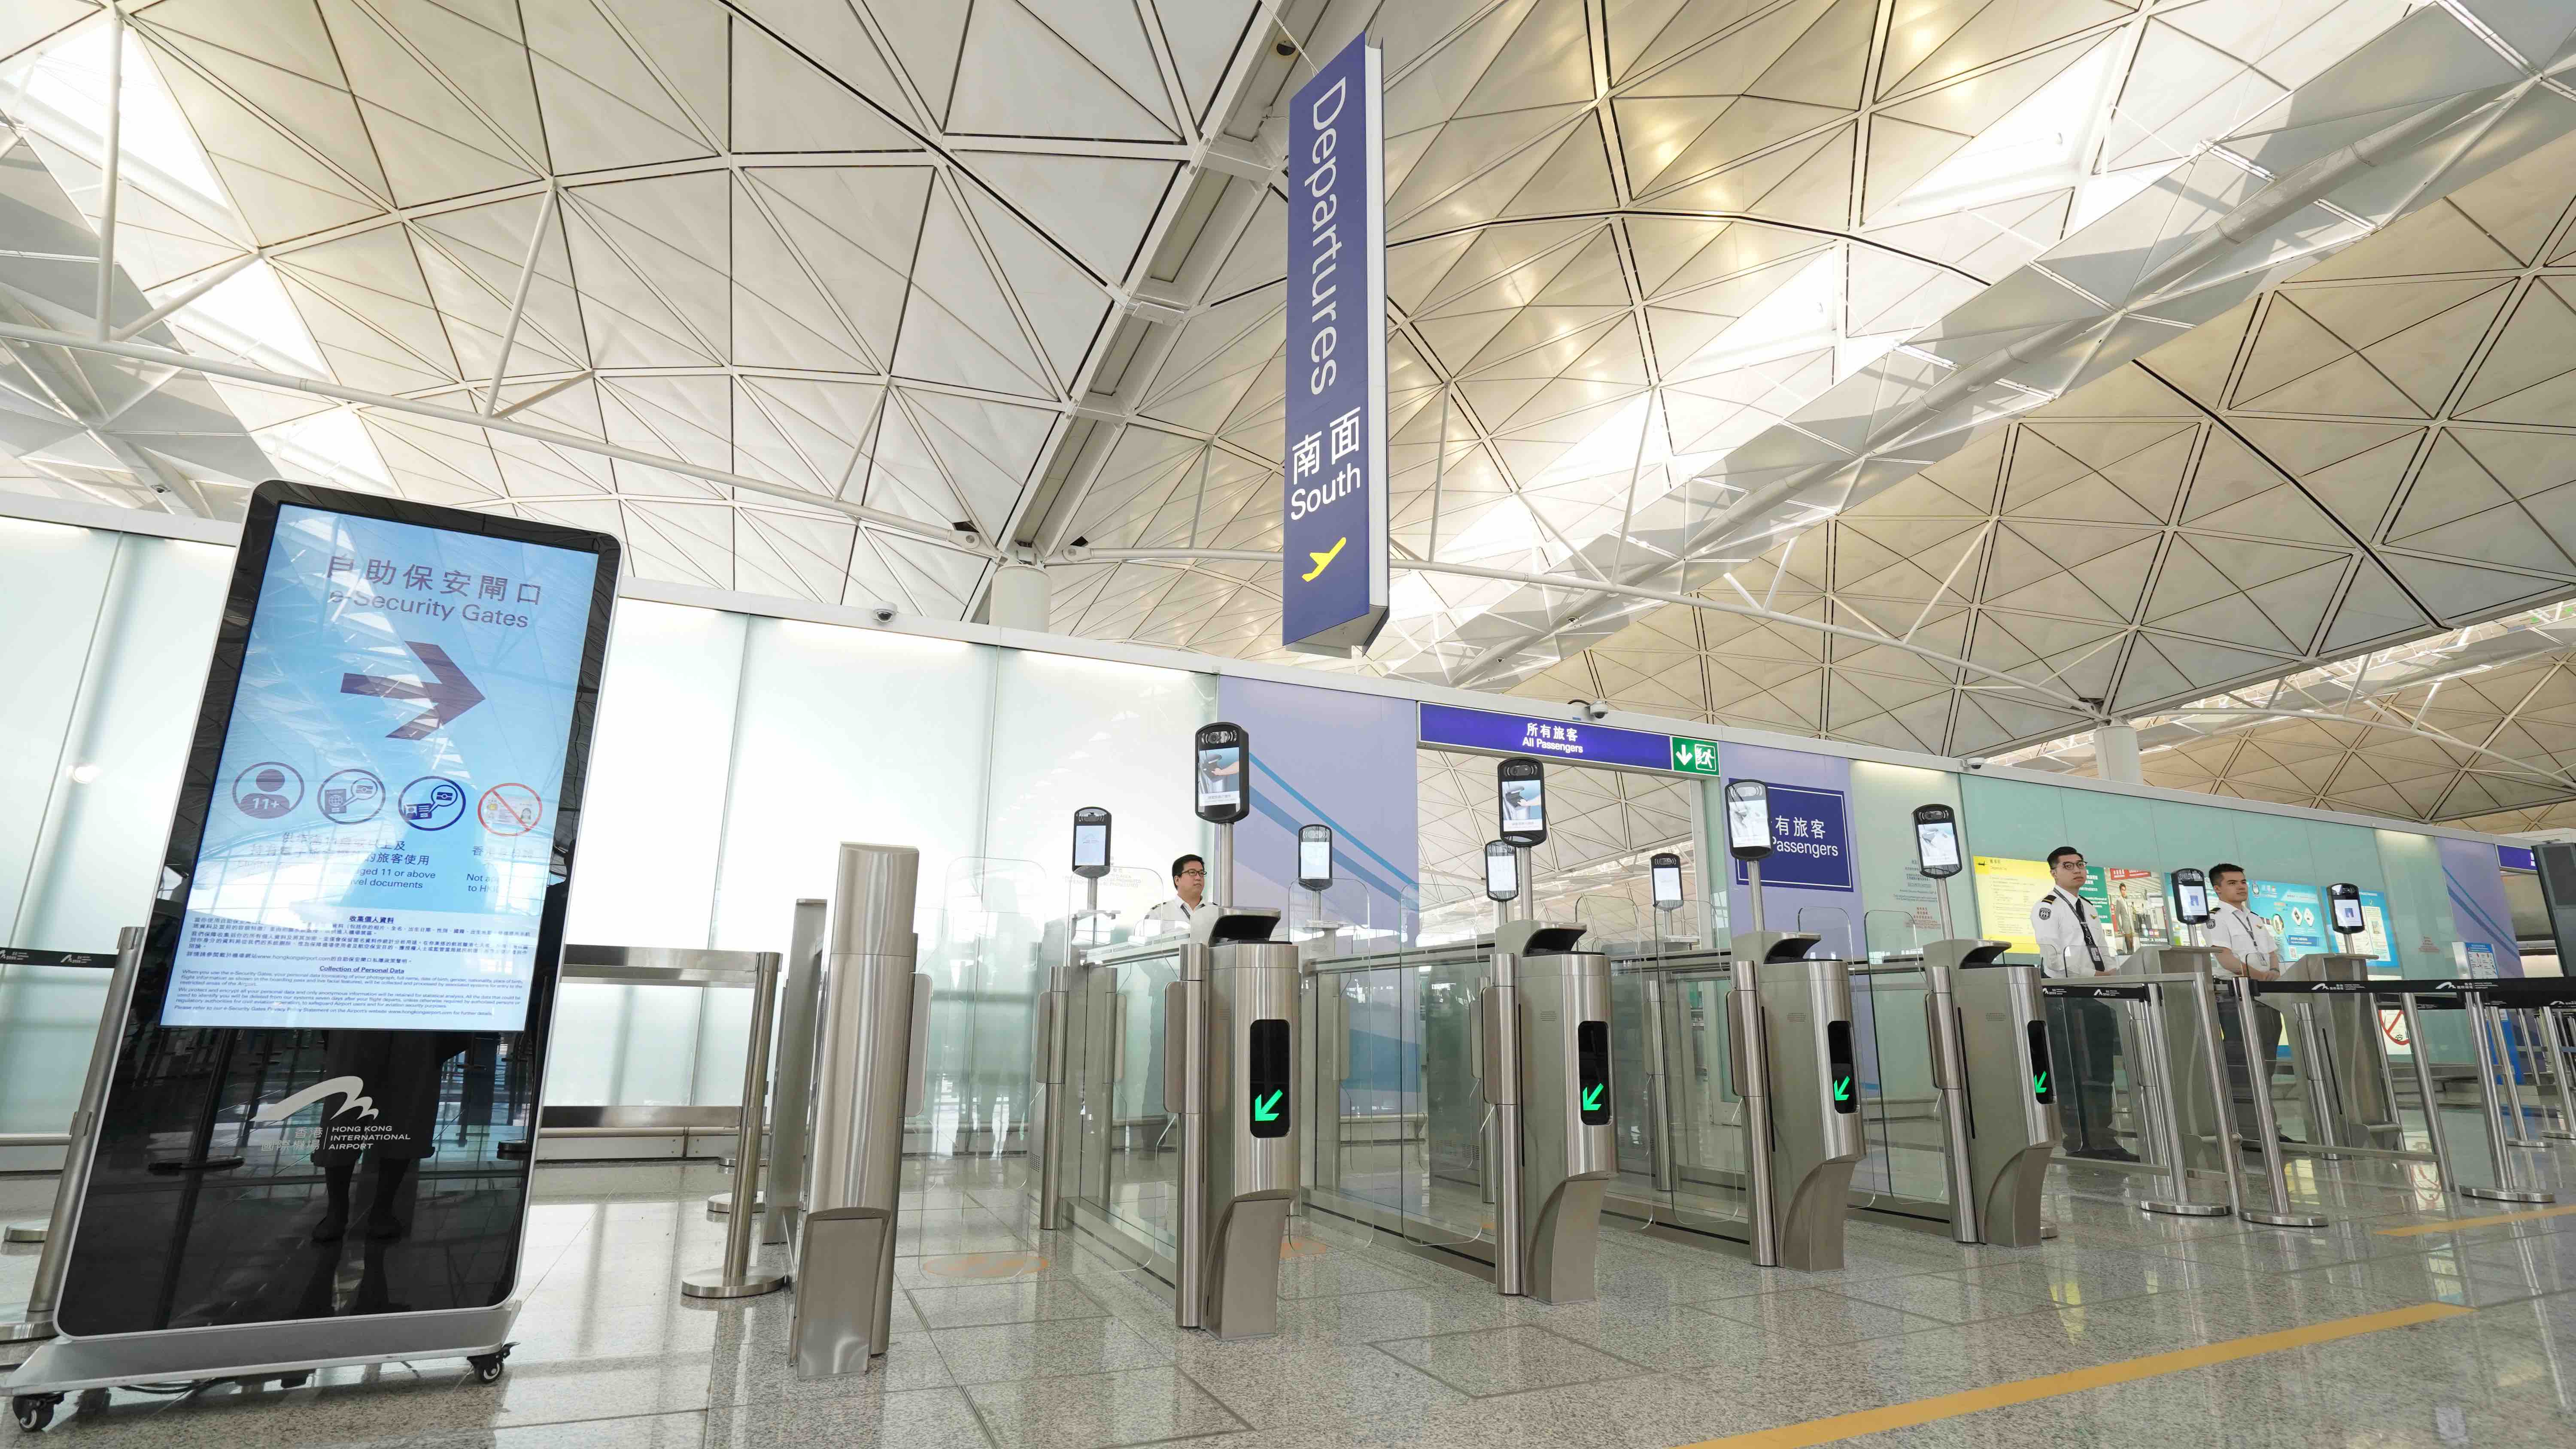 The new e-security gates at HK airport. Pic via HK airport.